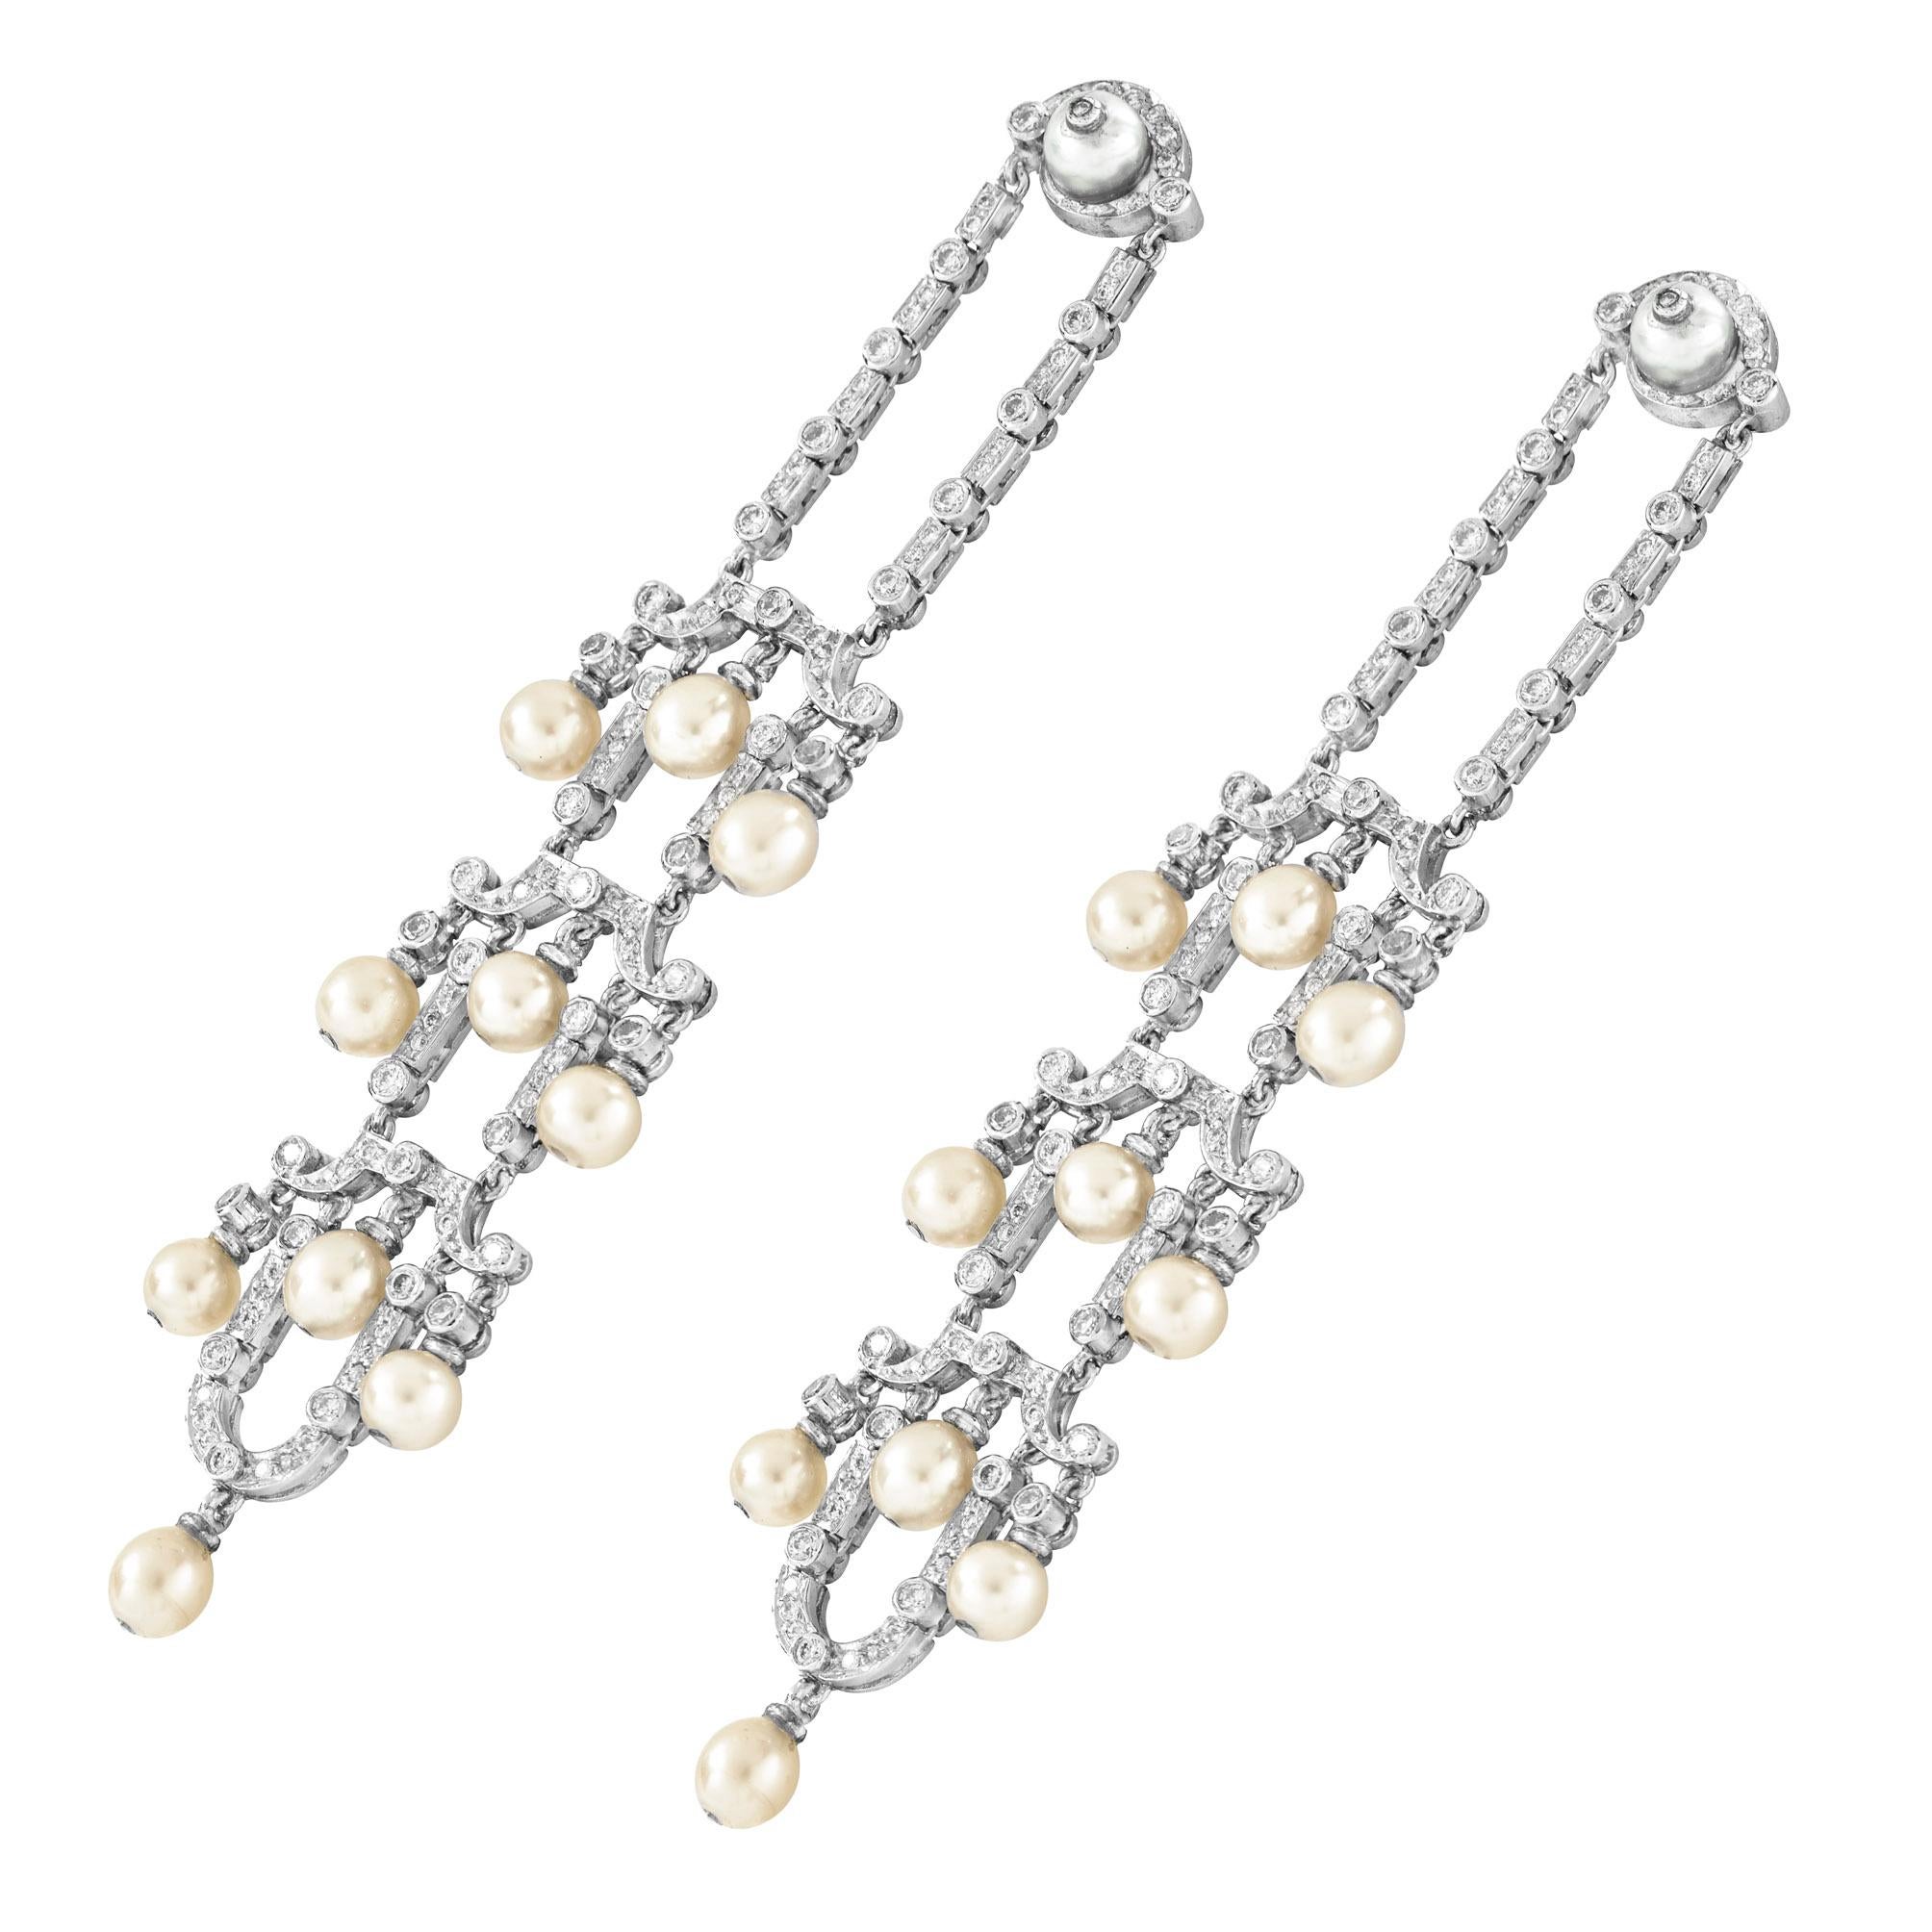 A pair of natural pearl and diamond drop earrings, each earring comprising of three sets of diamond-set tiers, each with three pearl drops and the last terminated with one pearl drop, suspended from a pearl with a diamond to the centre surrounded by